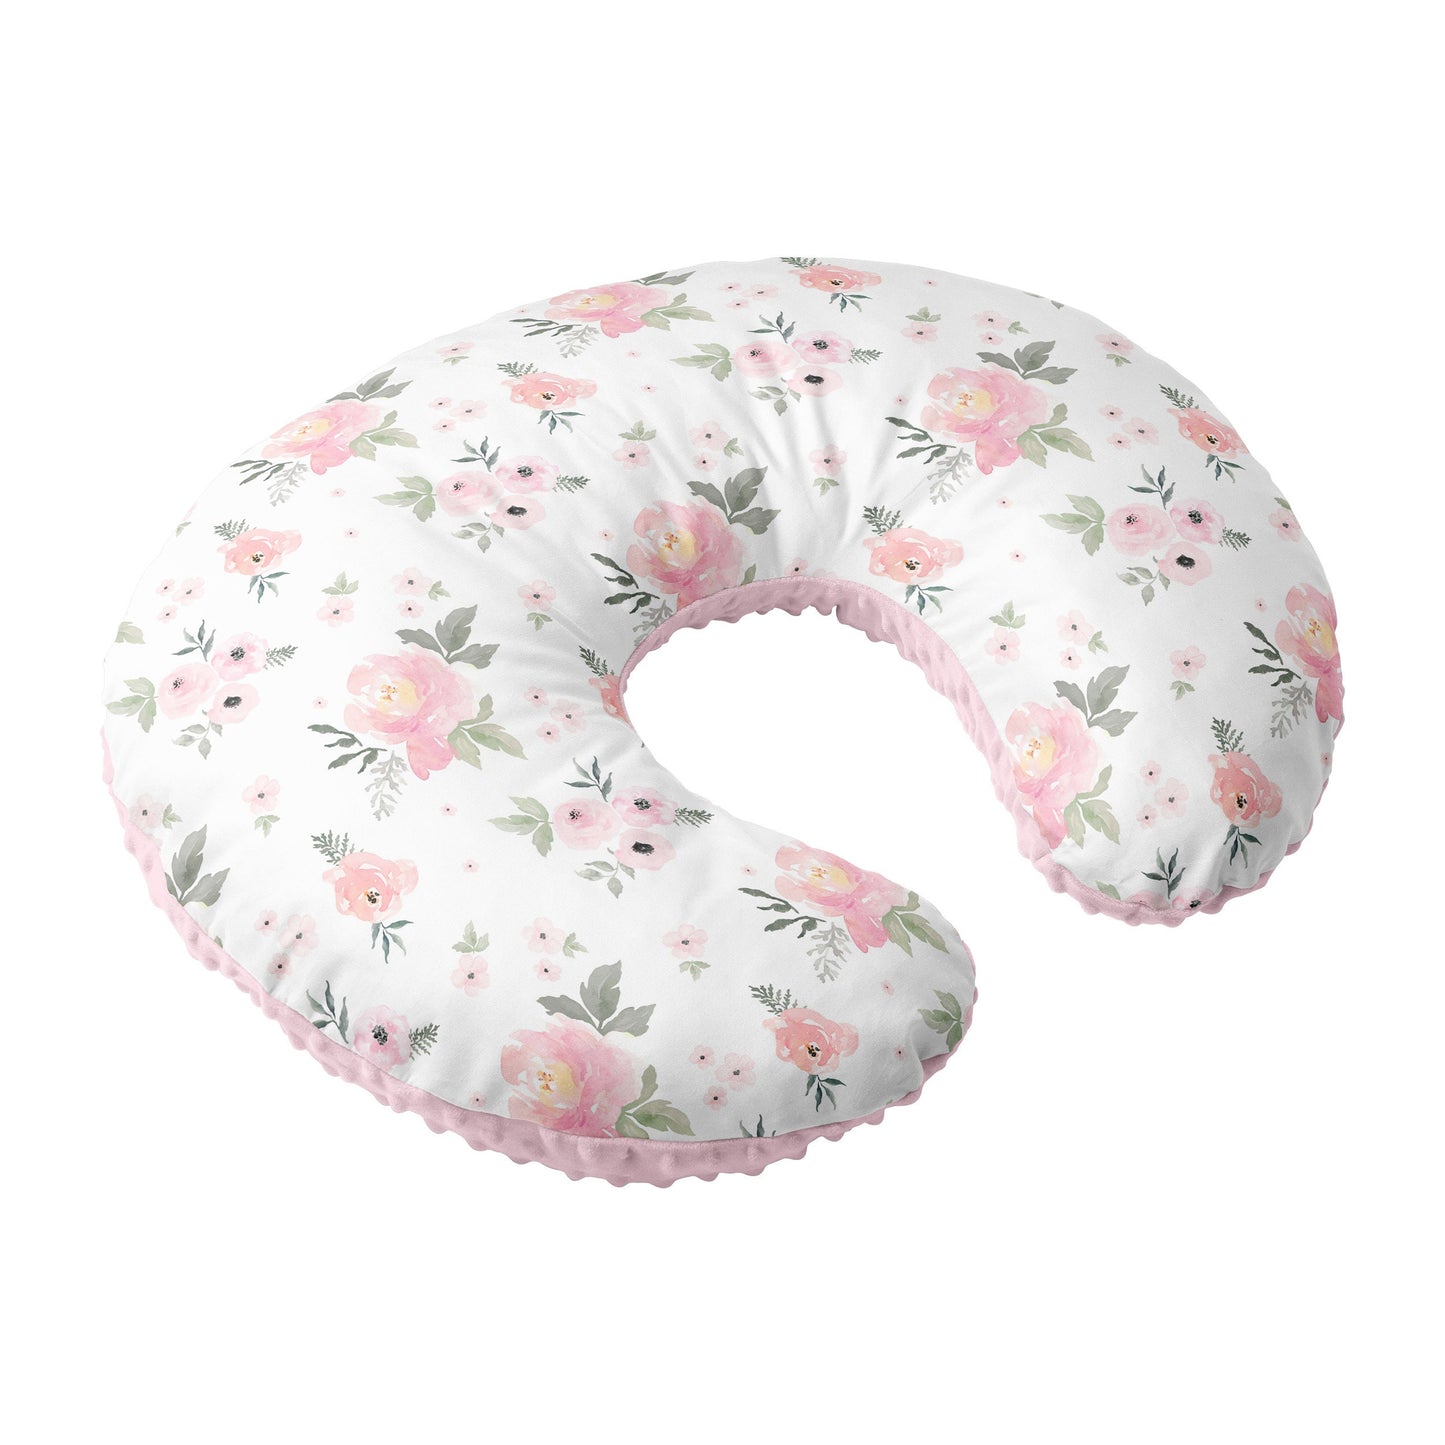 Nursing Pillow Cover,100% Cotton, Slipcover Minky Girl - Nursery Decor for Baby Girls Pillow Cover Watercolor Floral (Sweet Blush Roses)